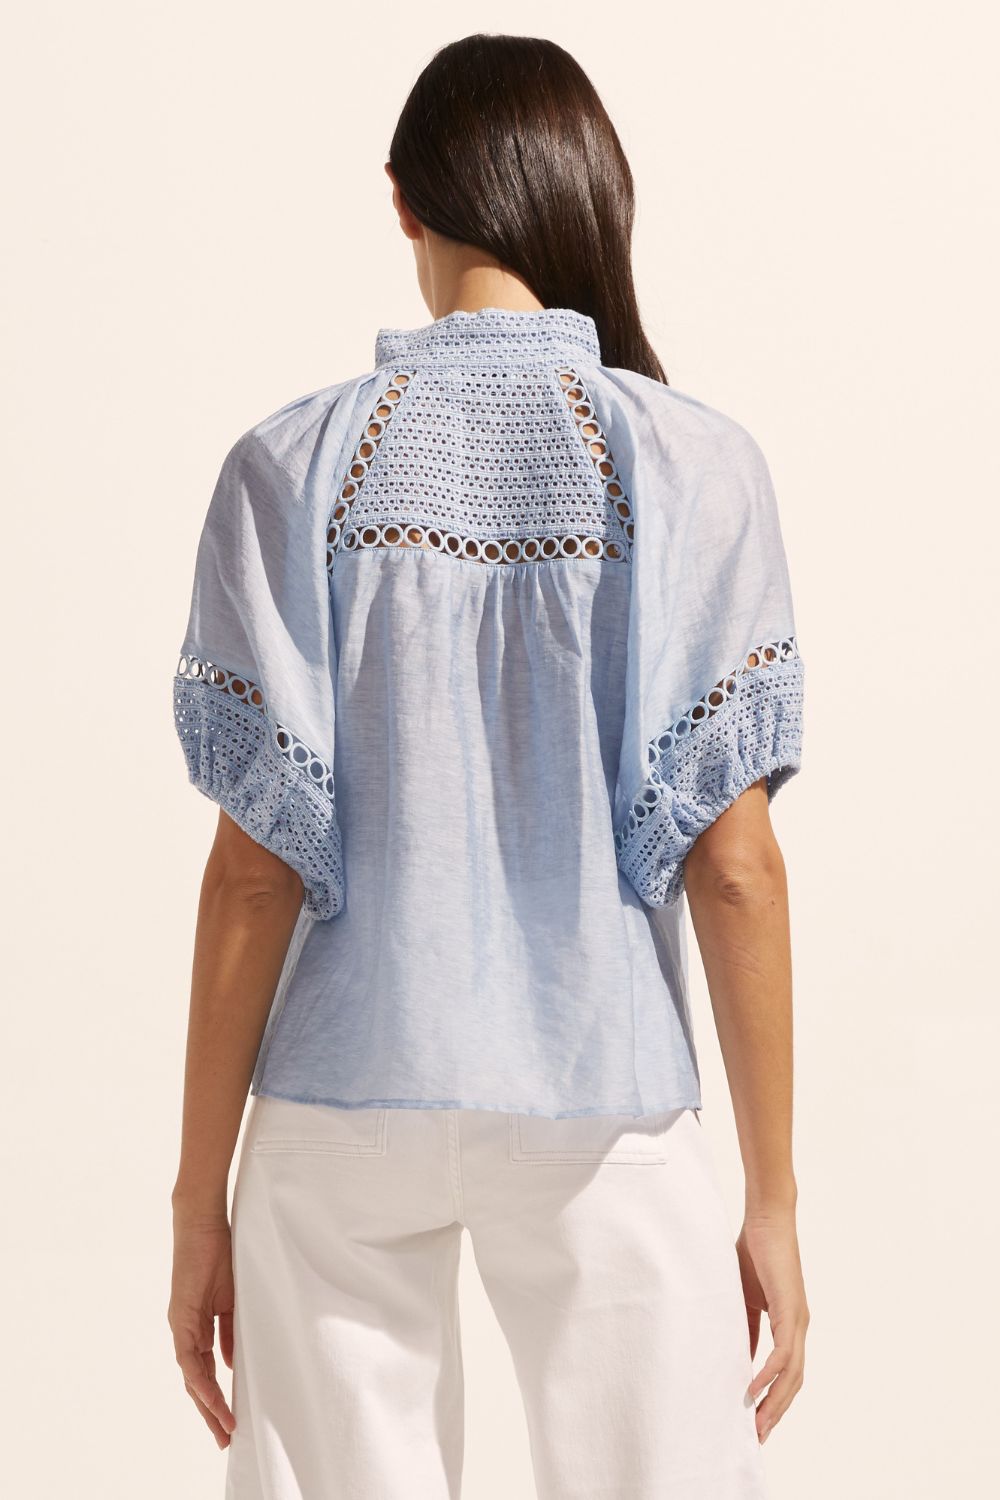 blue, top, high neck, mid-length sleeve, covered buttons, circular lace detailing, back image